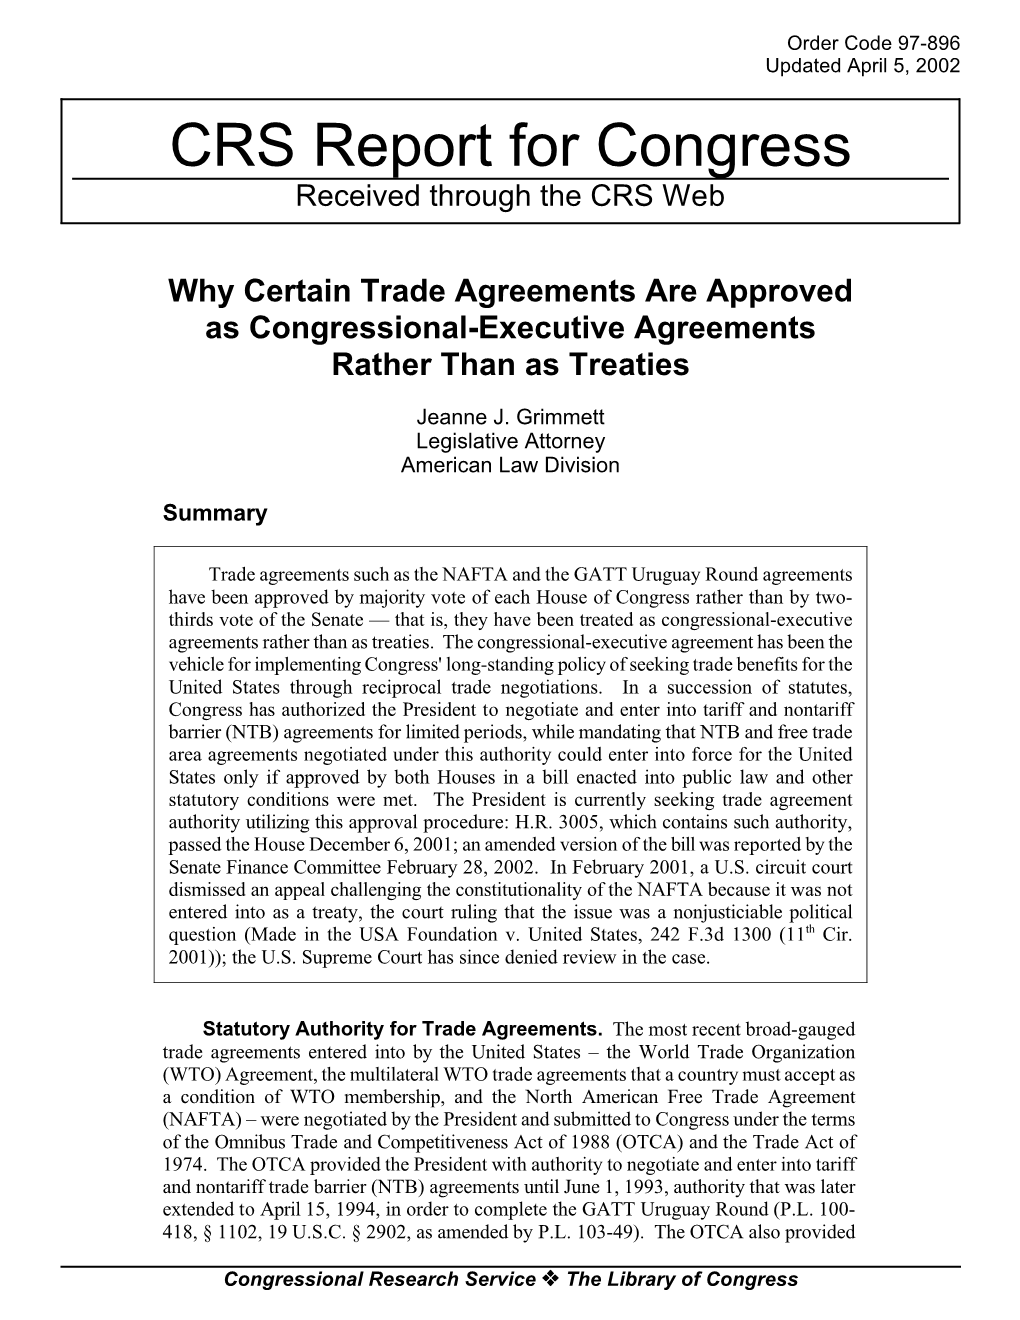 Why Certain Trade Agreements Are Approved As Congressional-Executive Agreements Rather Than As Treaties